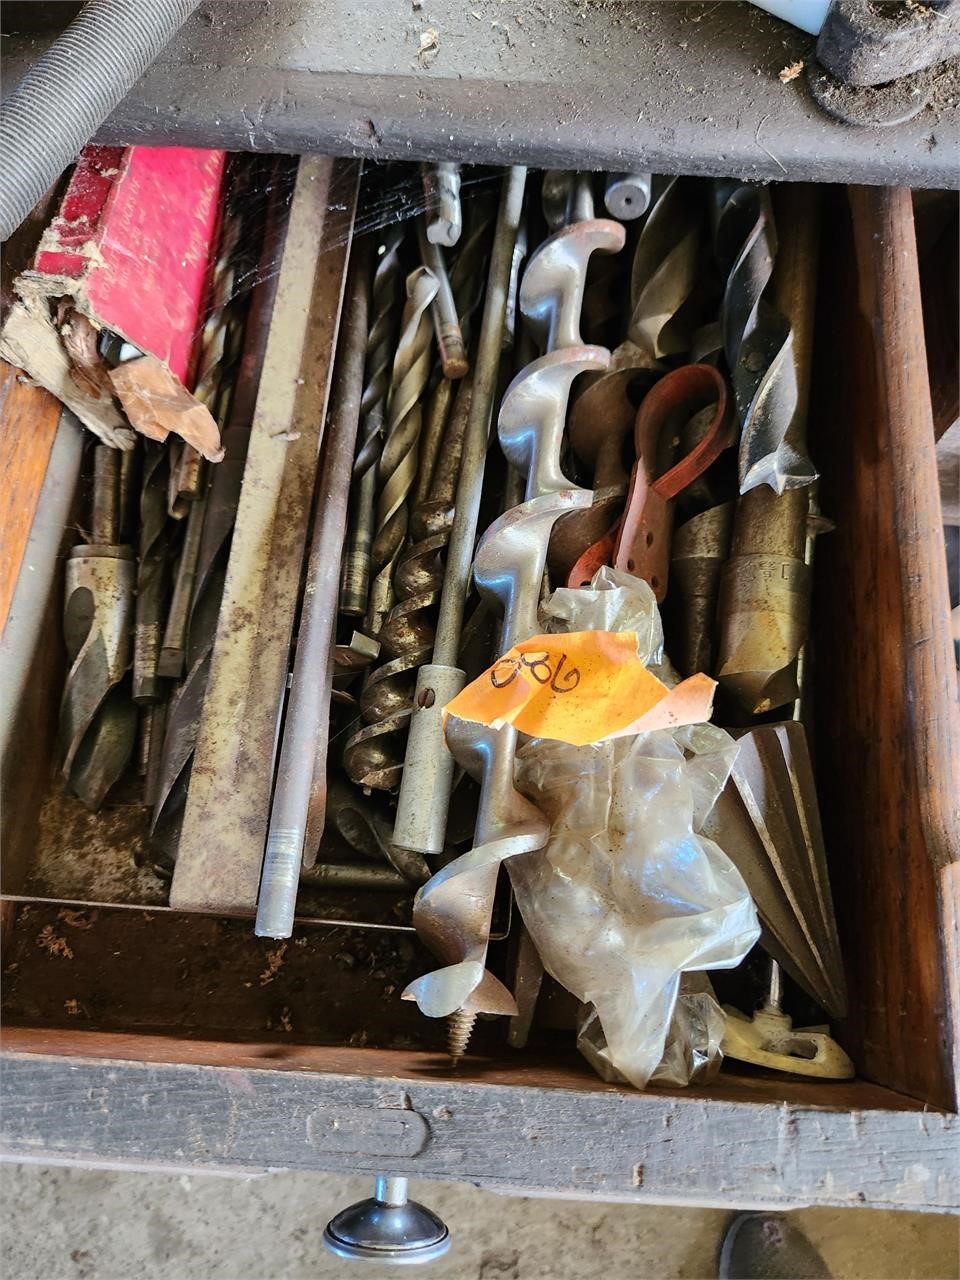 Drill bits Drawer contents